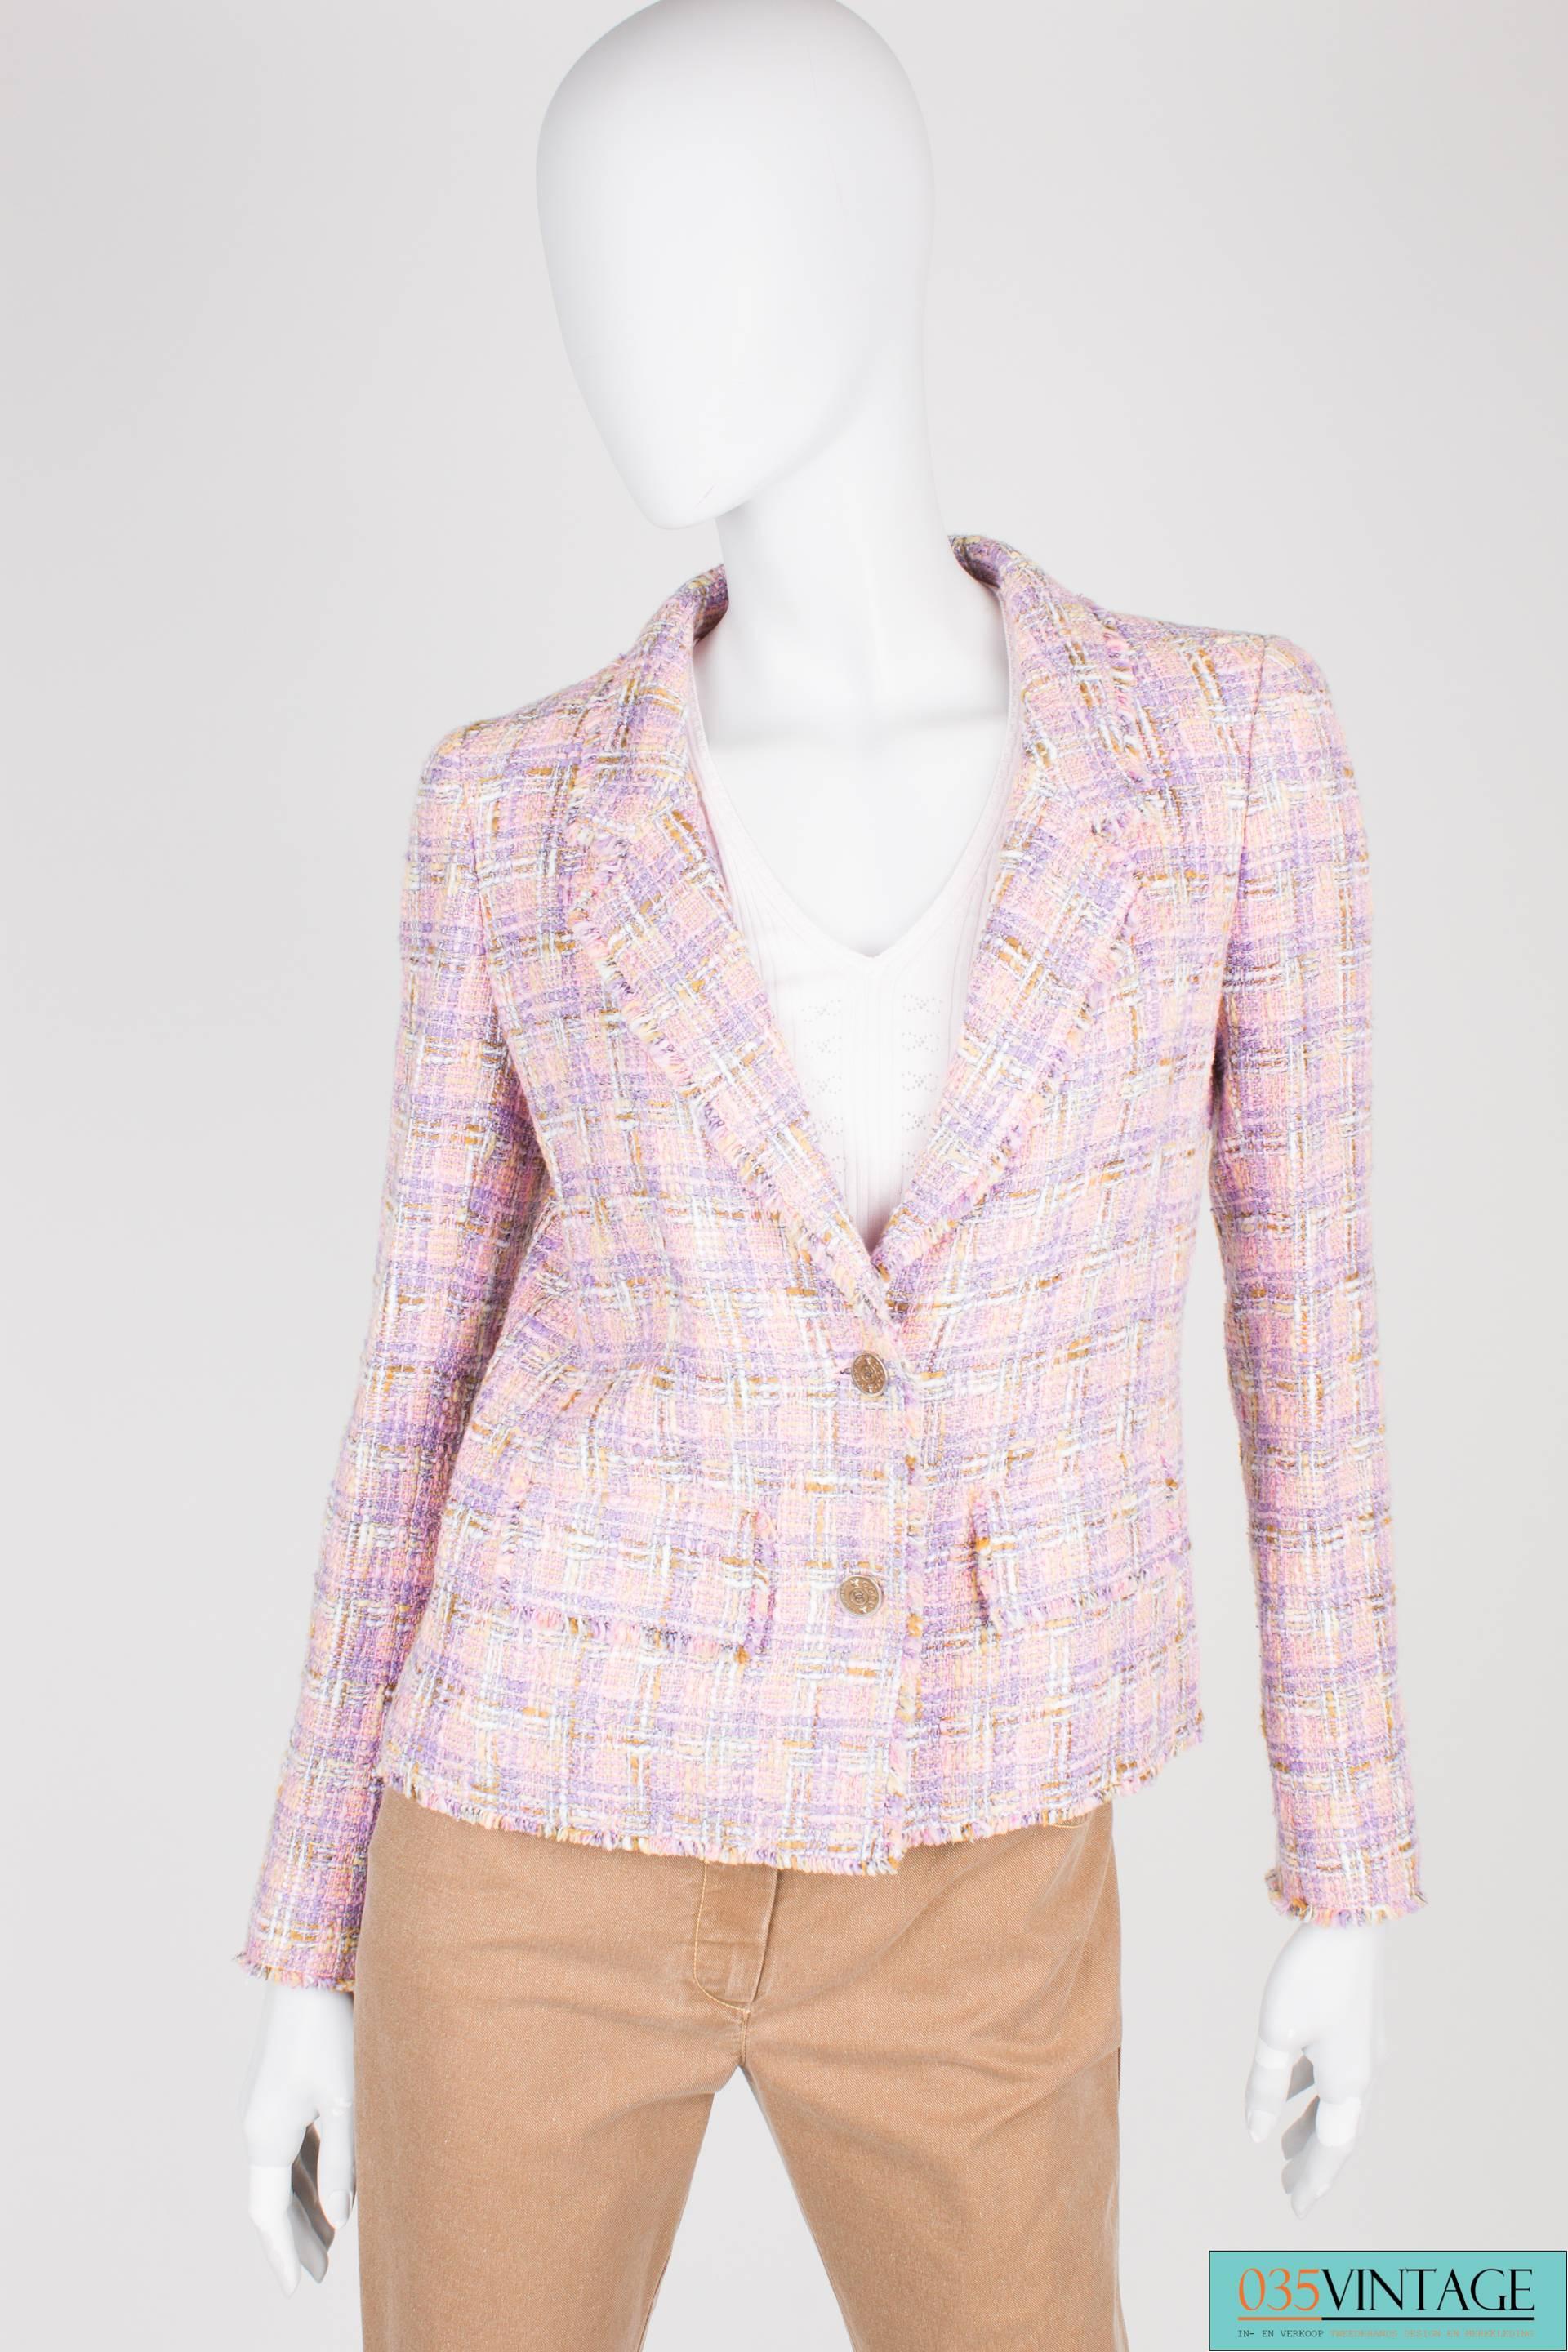 Three piece suit by Chanel; a jacket, pants and top.

The jacket is made of purple, pink, brown and white bouclé. Front closure with two metal buttons, three of these buttons at the end of the sleeves. A little smaller of course. Two flap pockets.